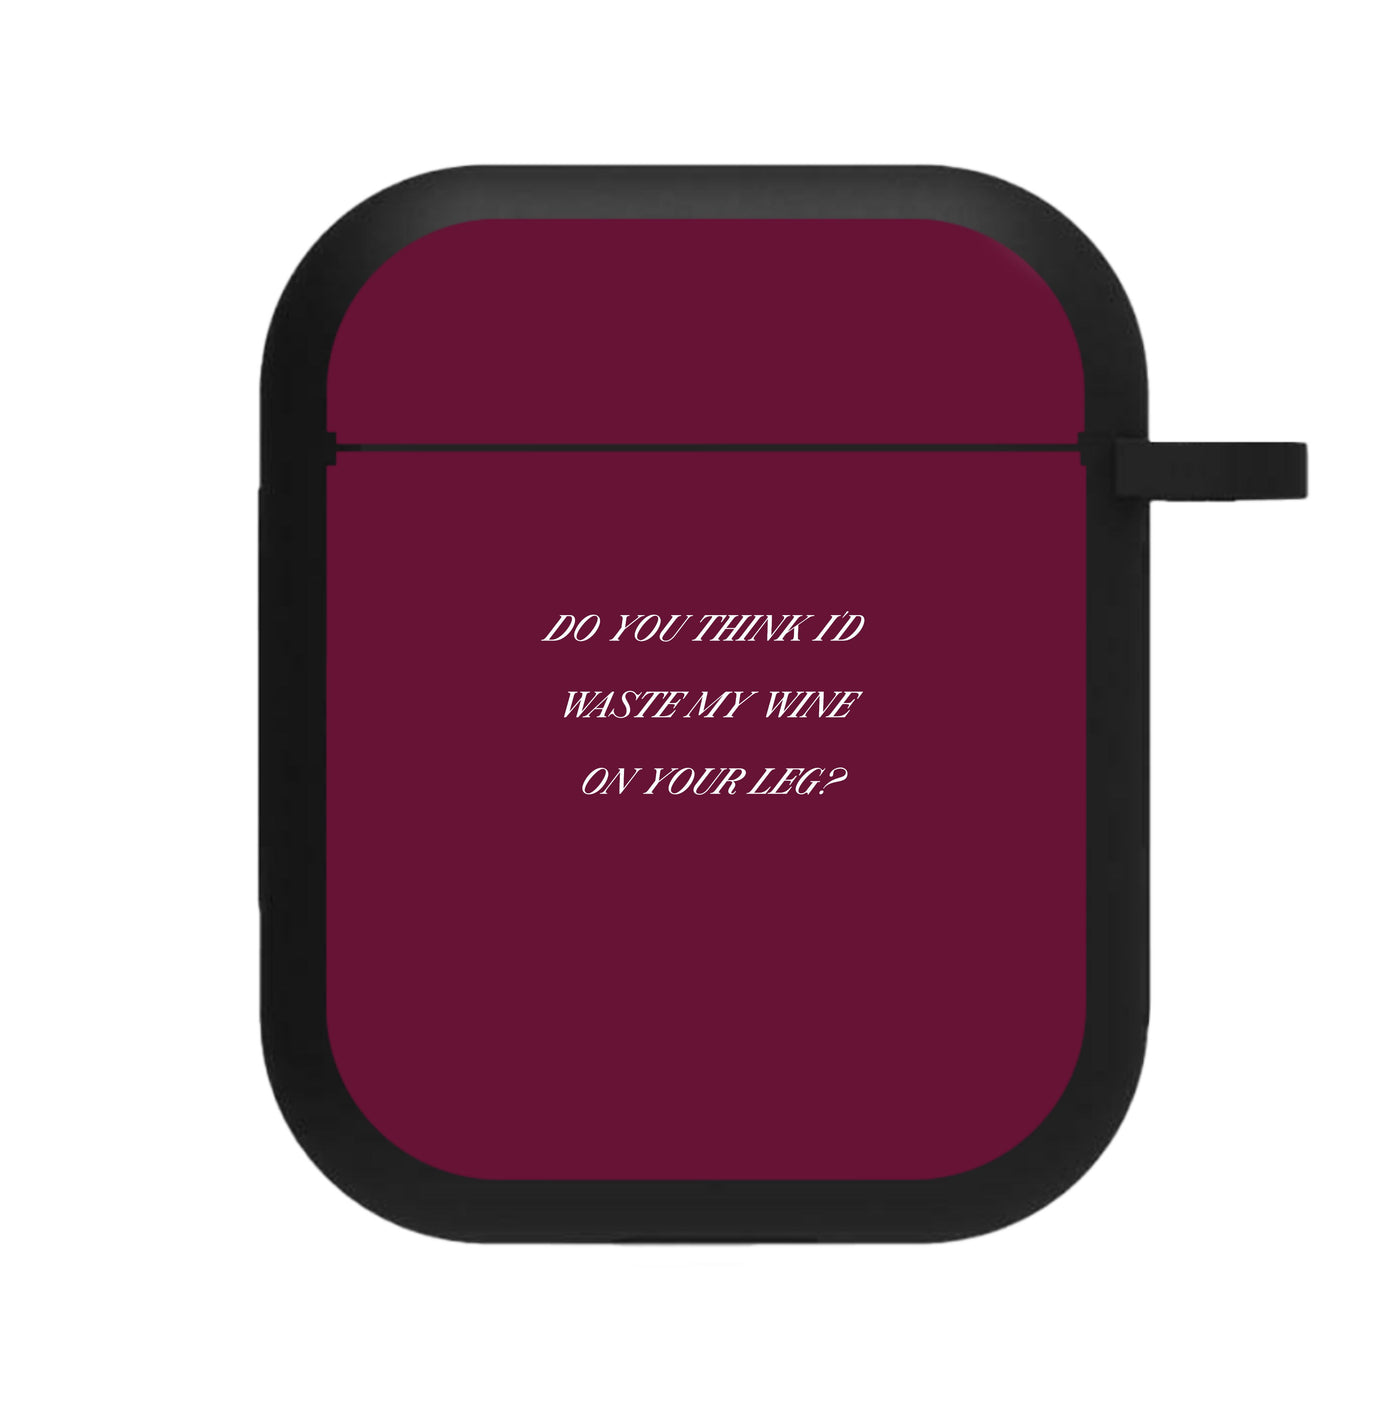 Do You Think I'd Waste My Wine On Your Leg? - Islanders AirPods Case